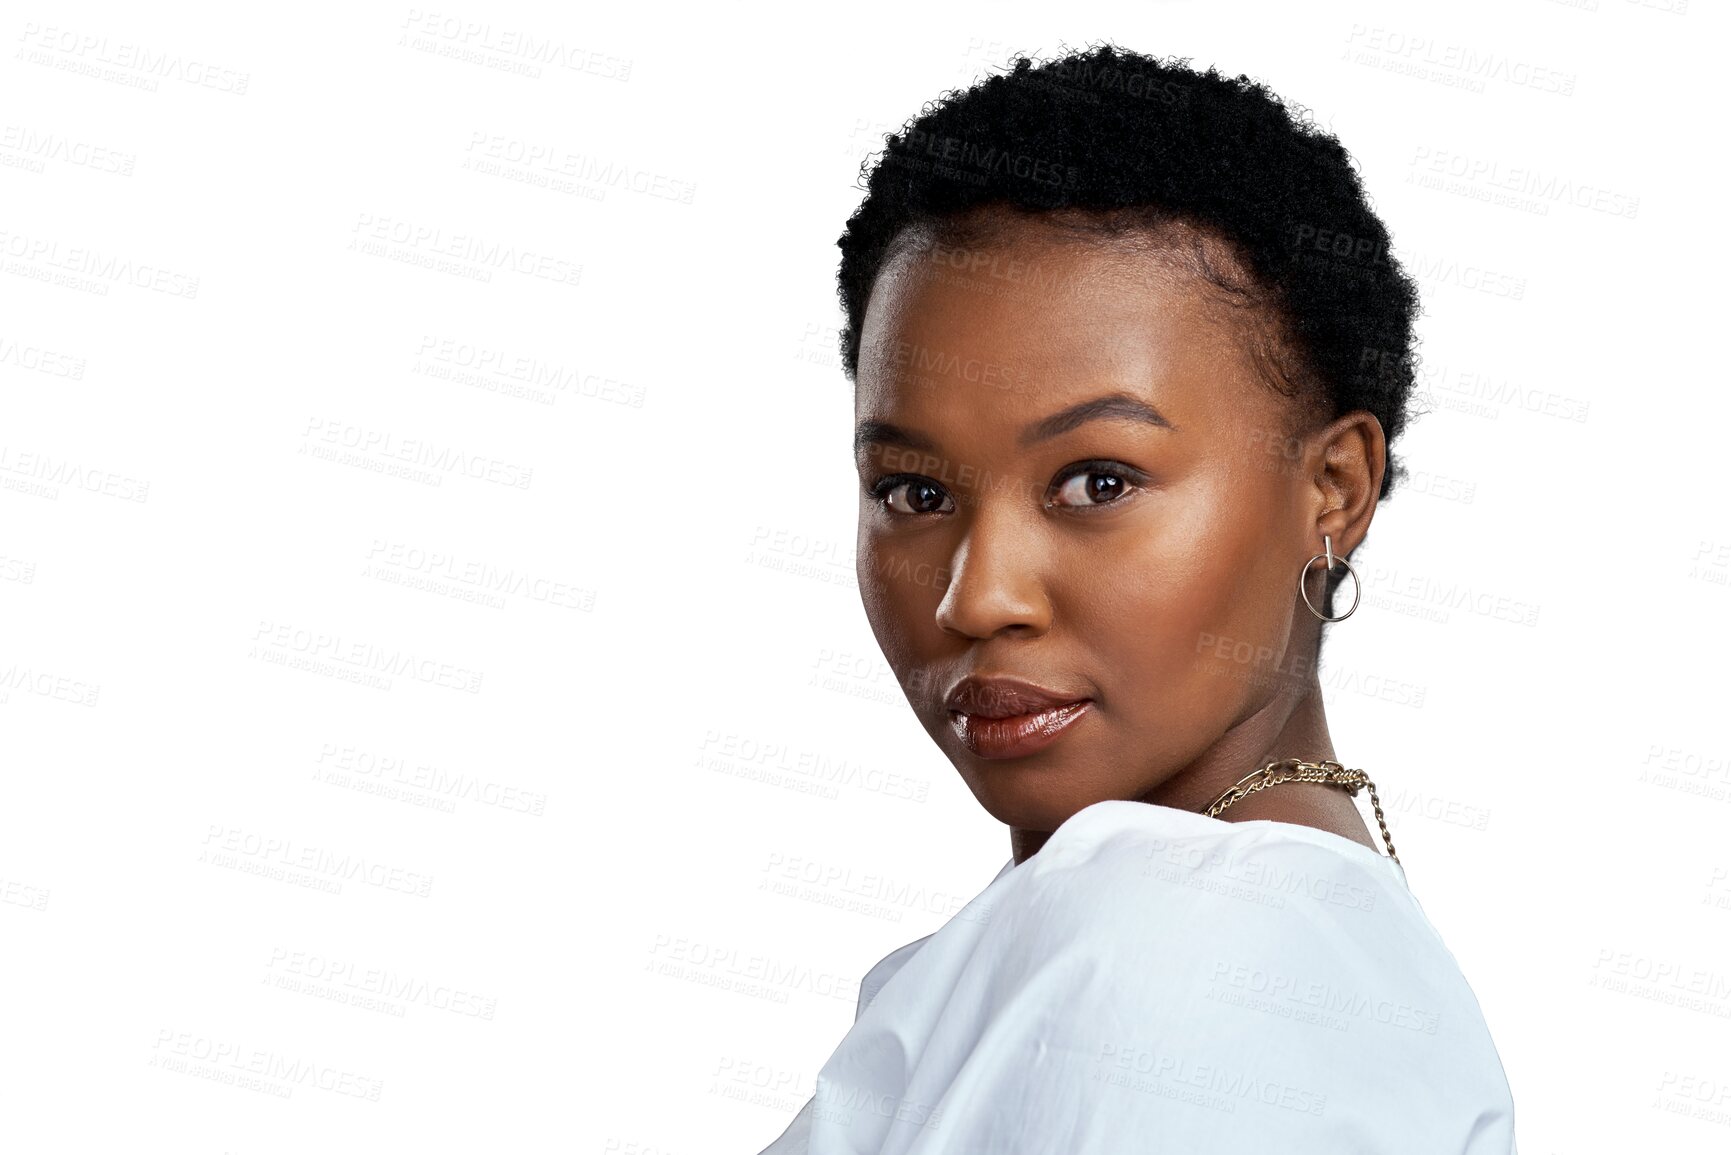 Buy stock photo Face, serious and black woman entrepreneur with focus on a goal isolated in a transparent or png background. Beauty, portrait and young African female person with a pride or business mindset